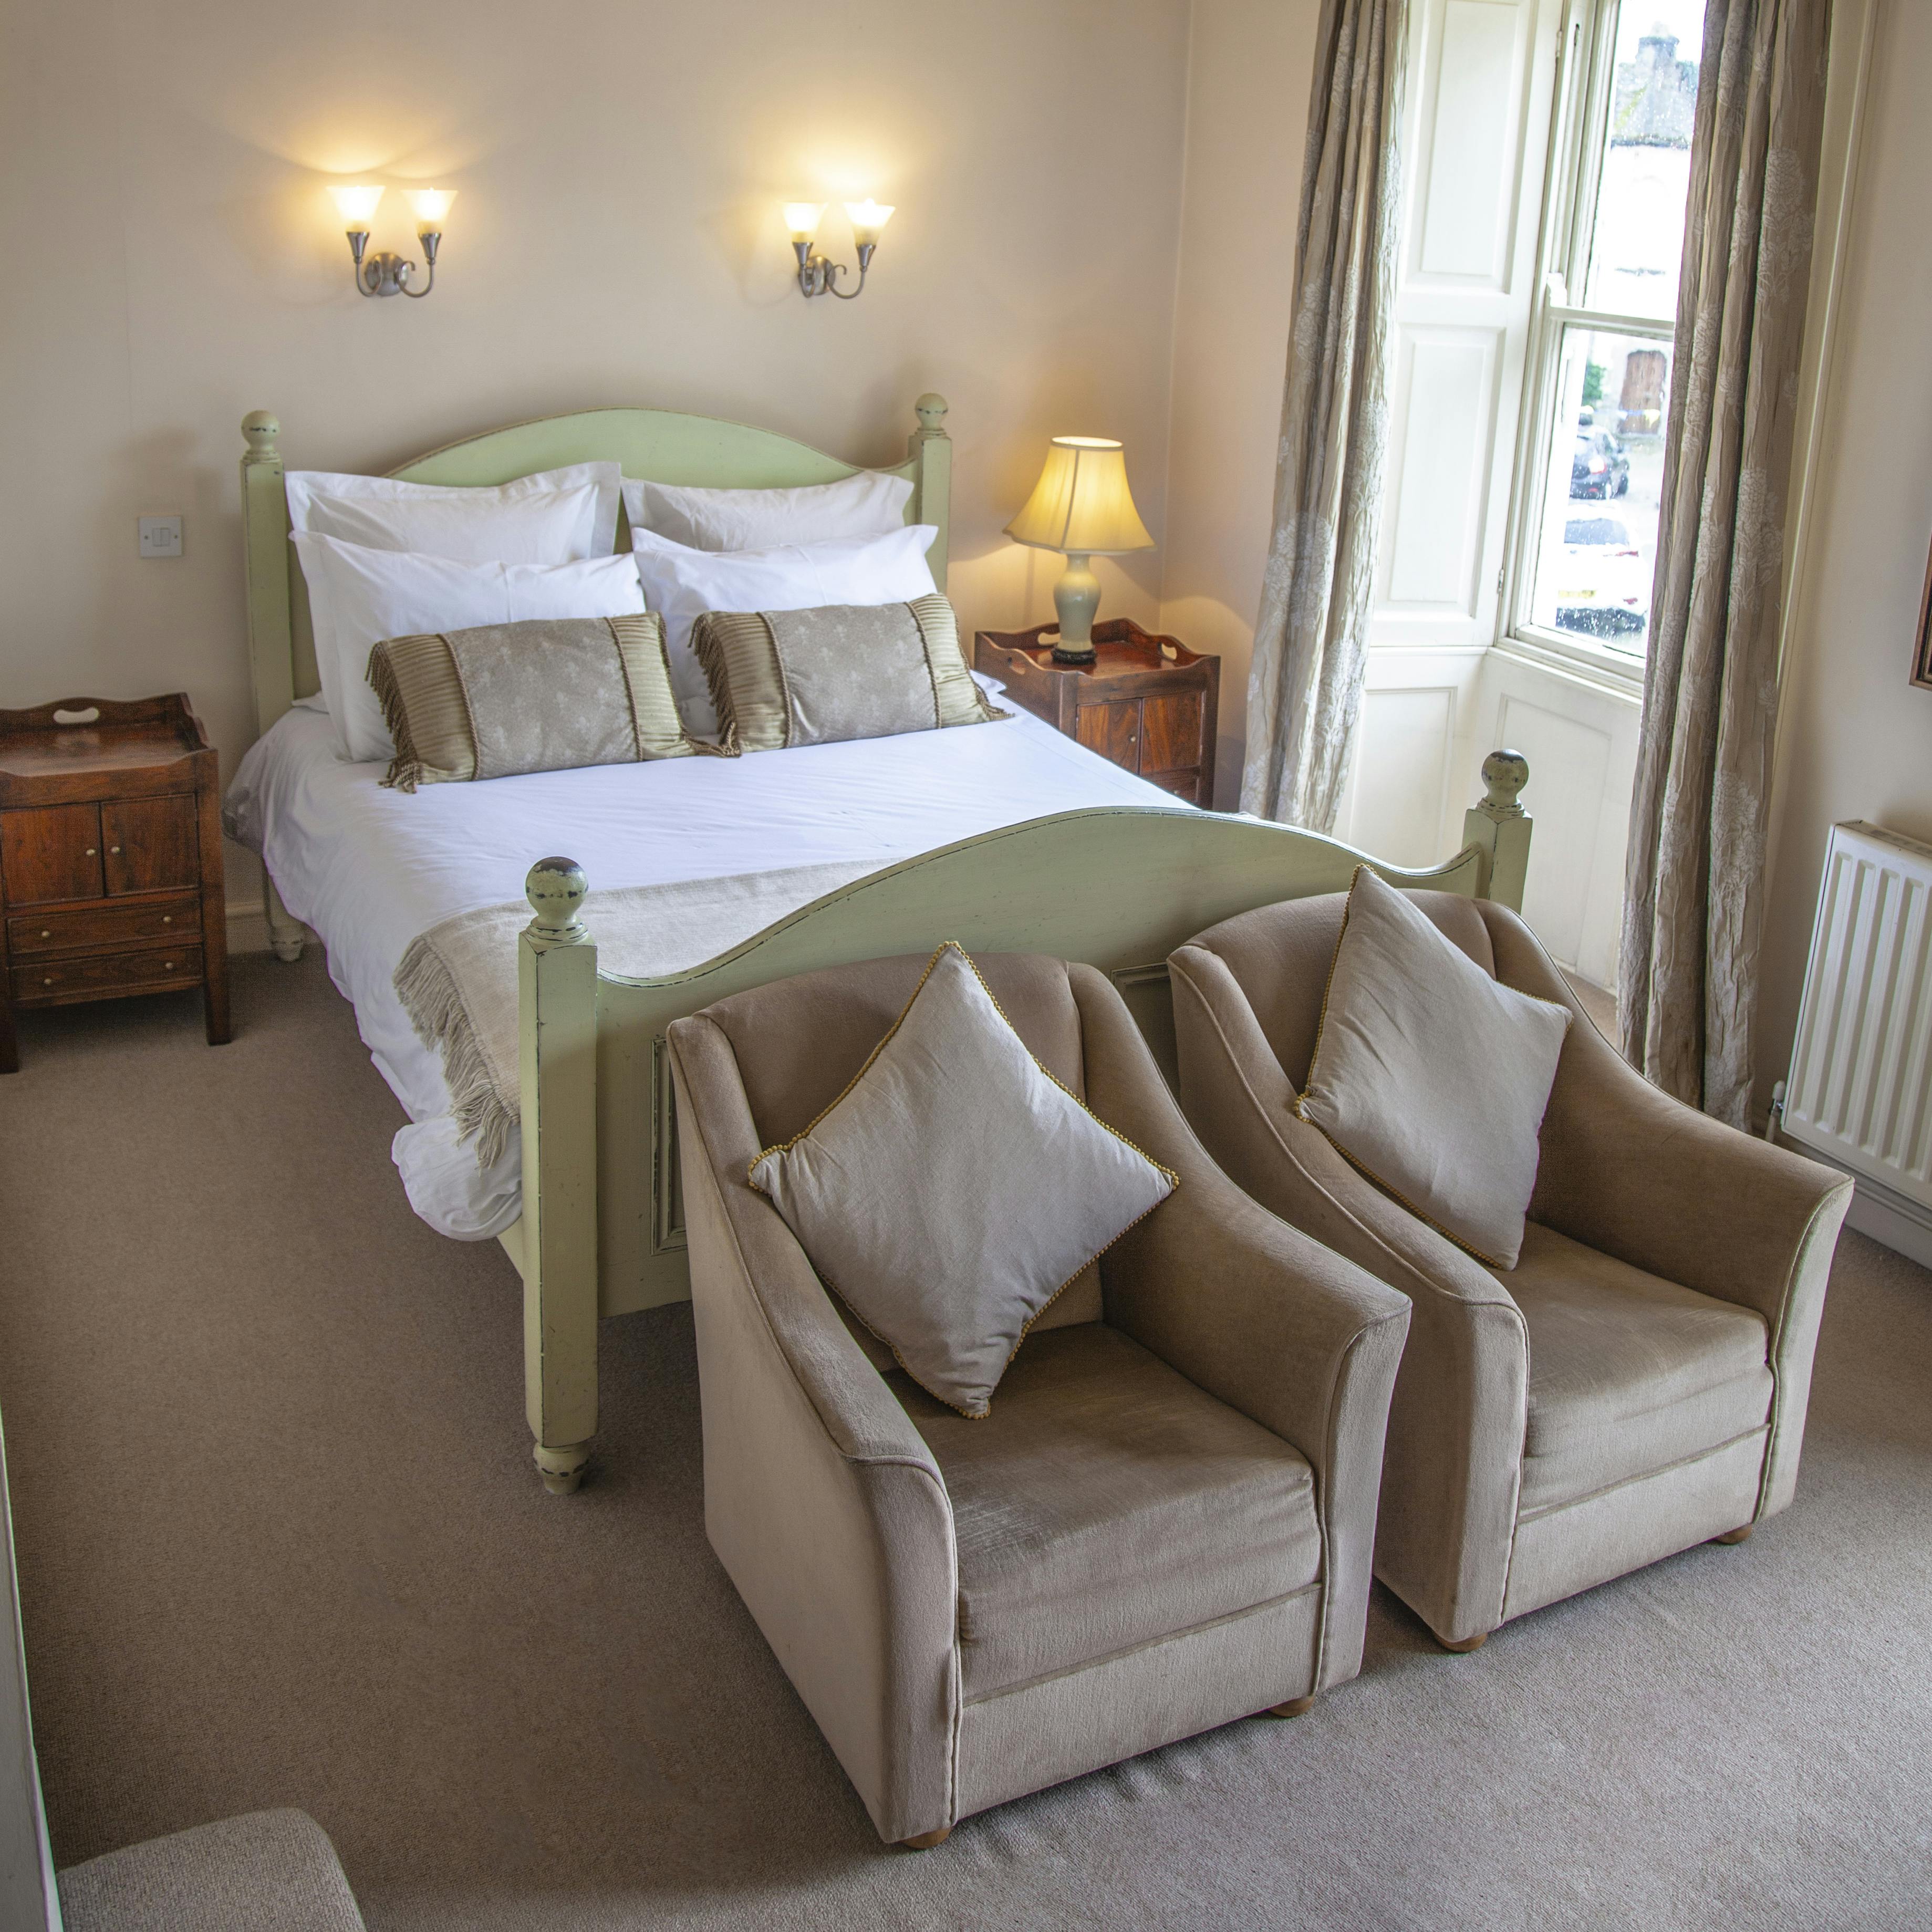 Double bedroom at The Wensleydale Hotel, Middleham, offers boutique accommodation in the heart of the Yorkshire Dales